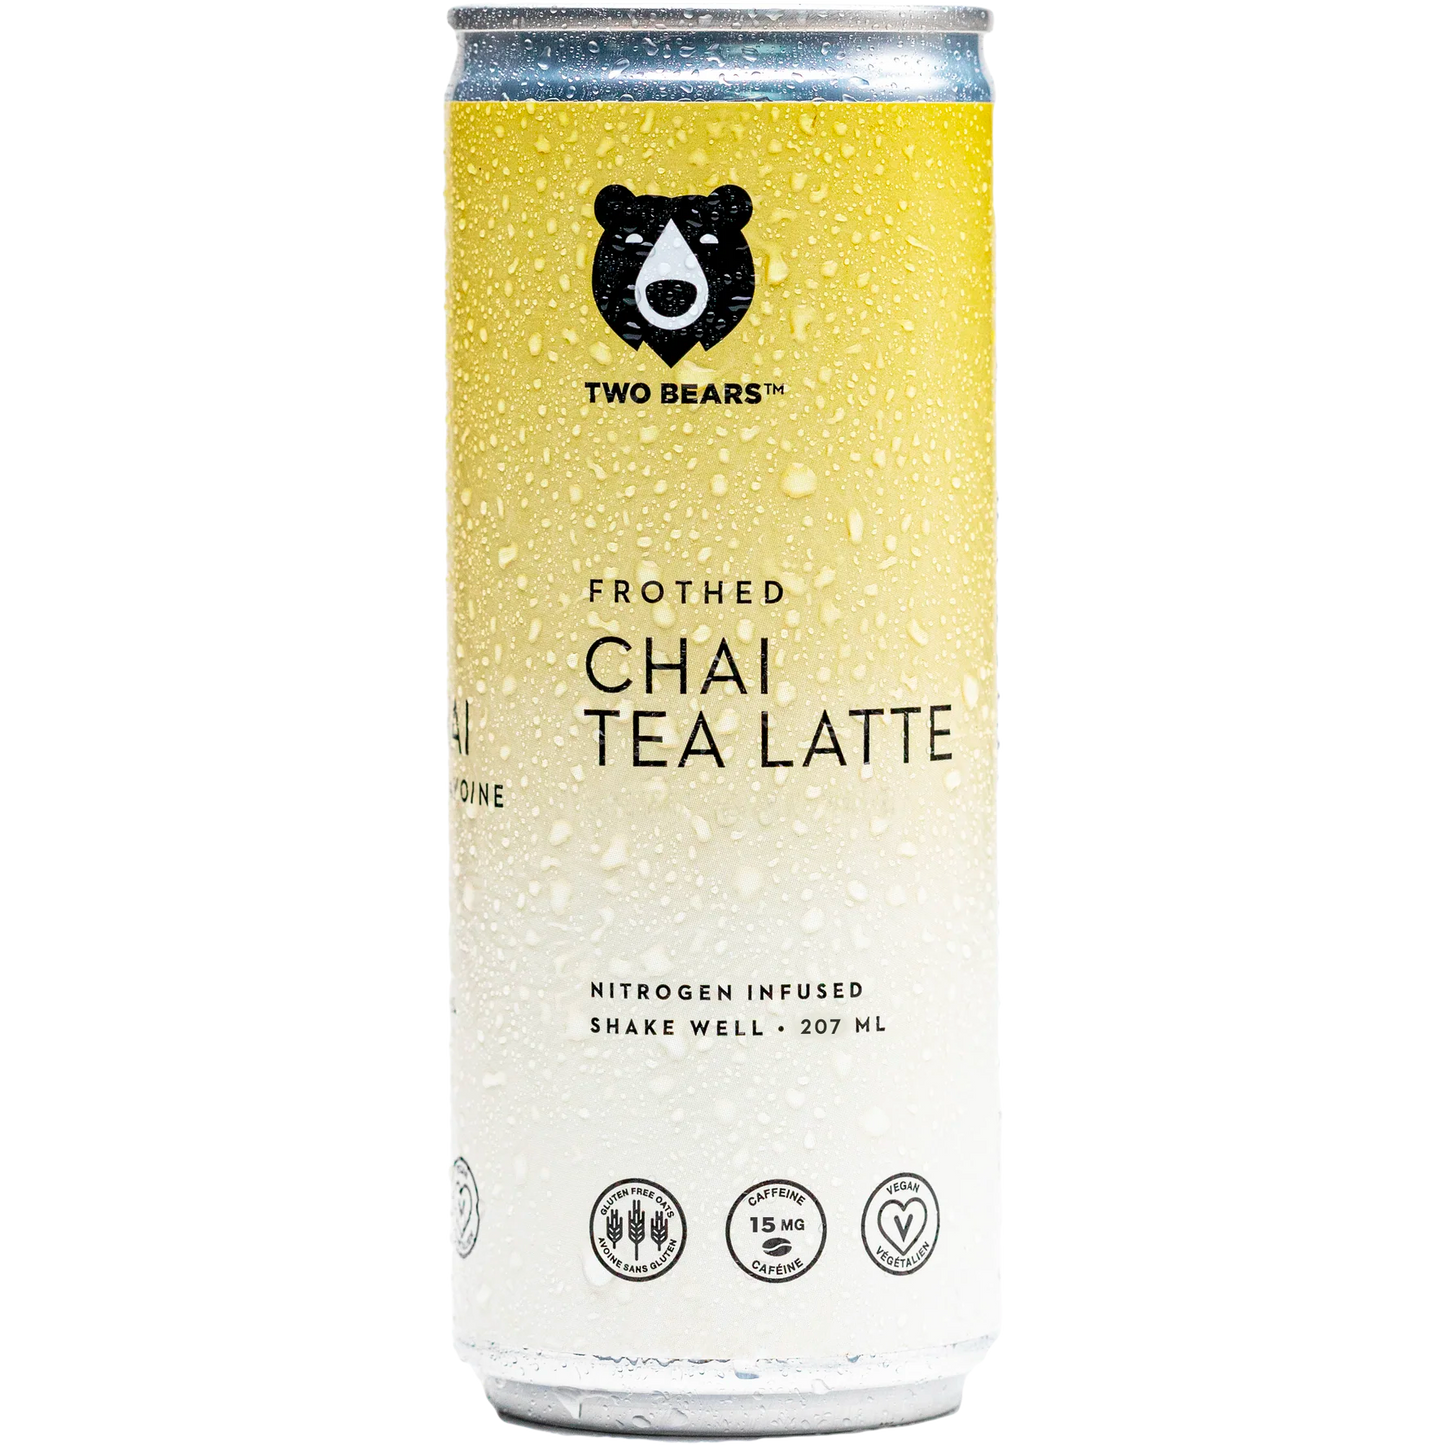 Two Bears Frothed Chai Oat Latte (207mL)